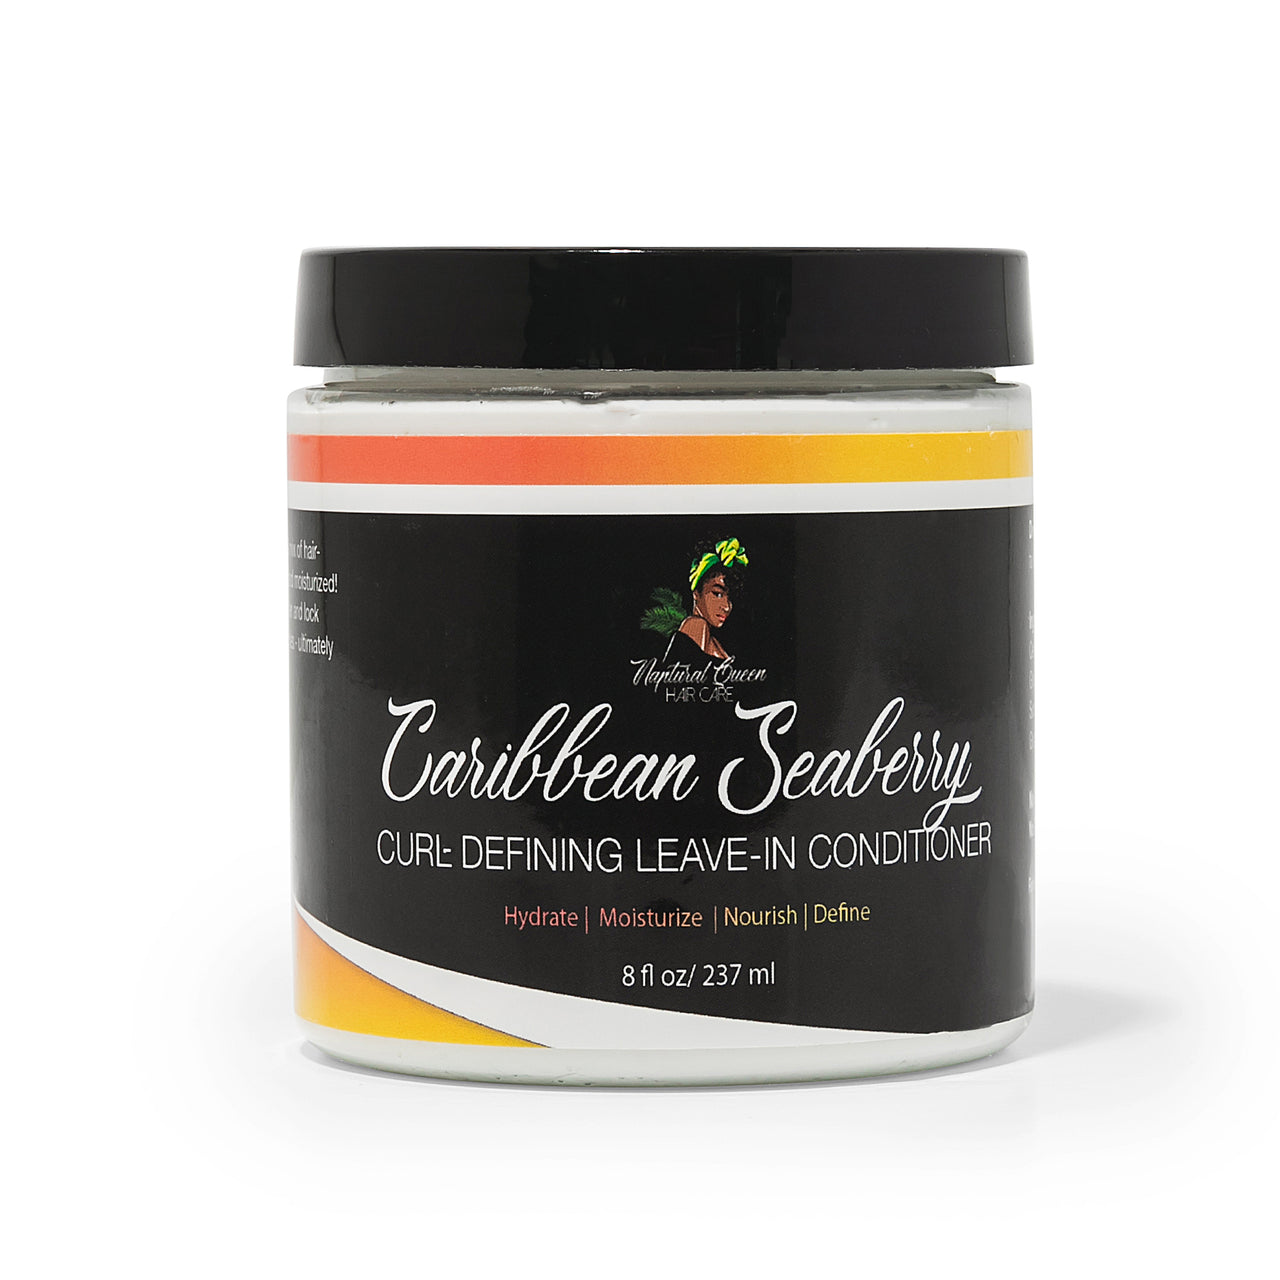 Caribbean Seaberry Curl Defining Leave-in Conditioner